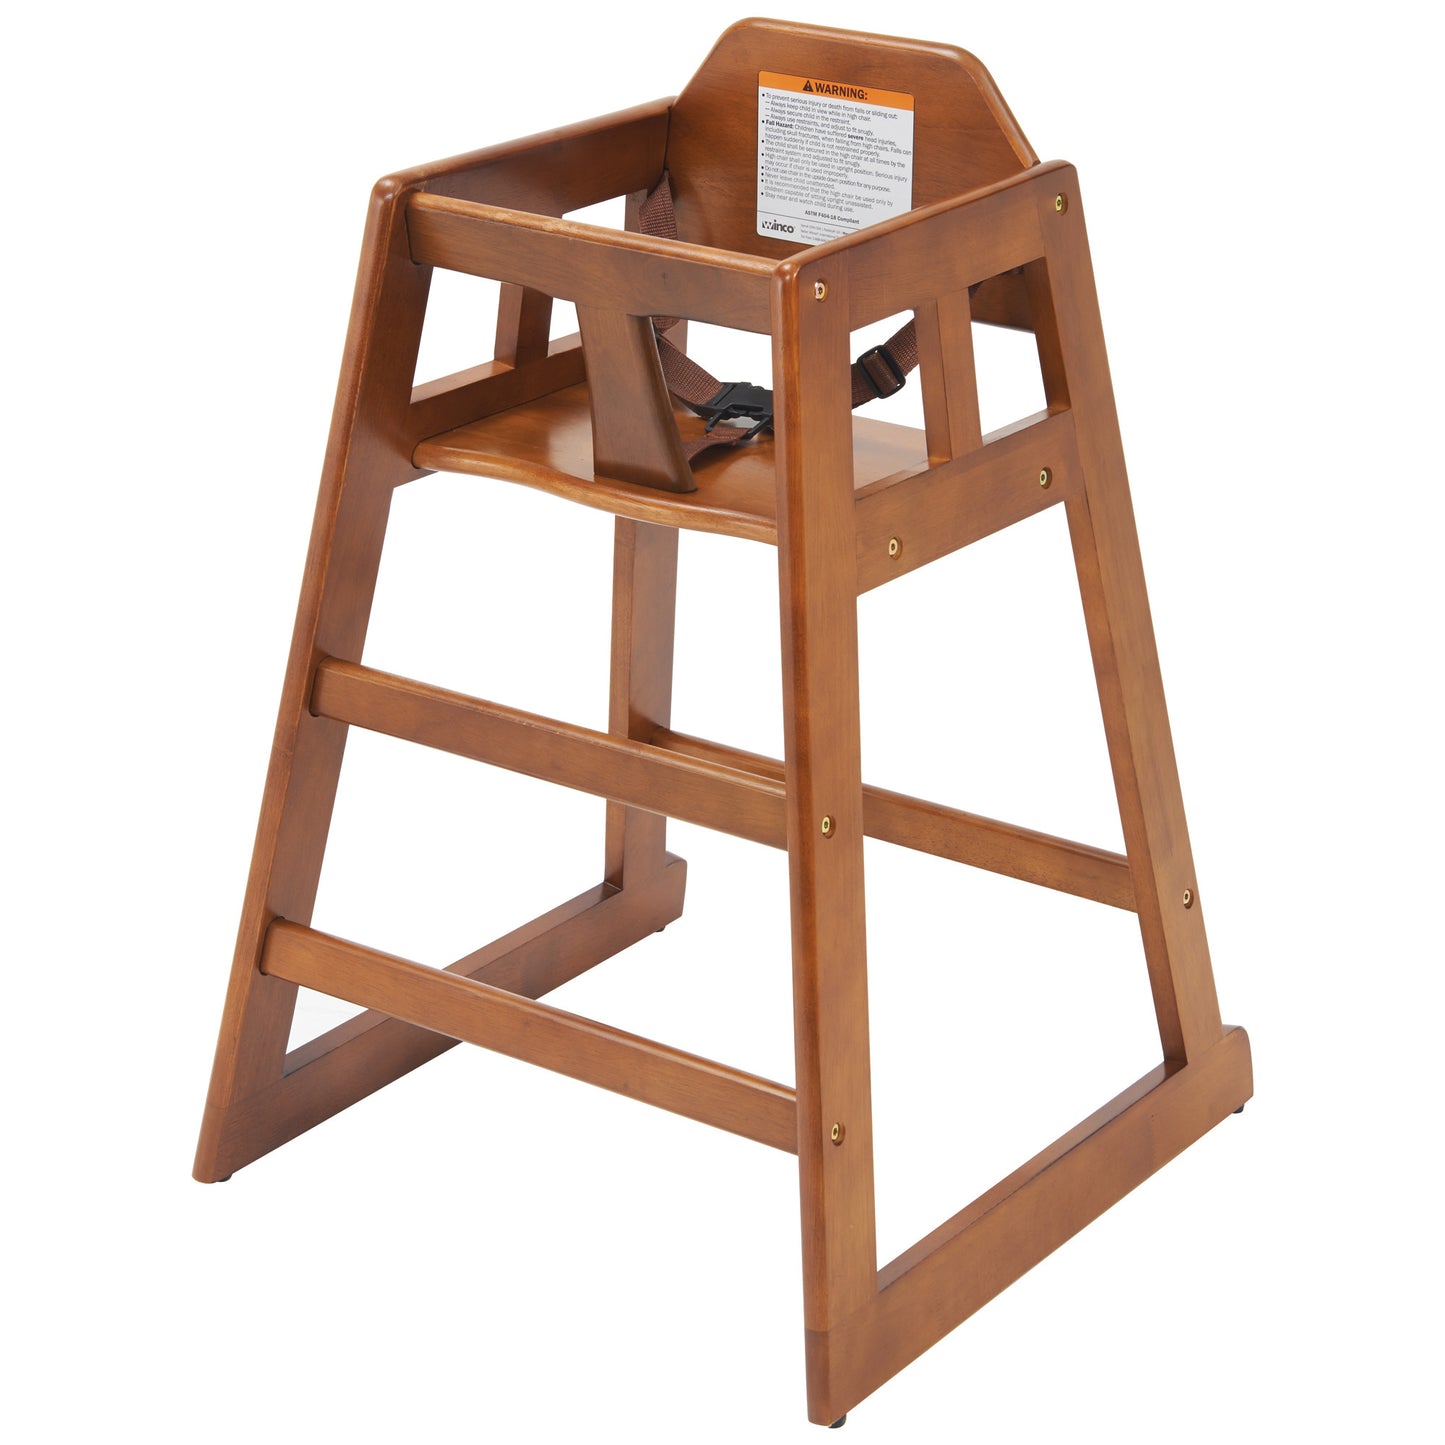 CHH-104 - Wooden High Chair, Knocked Down - Walnut